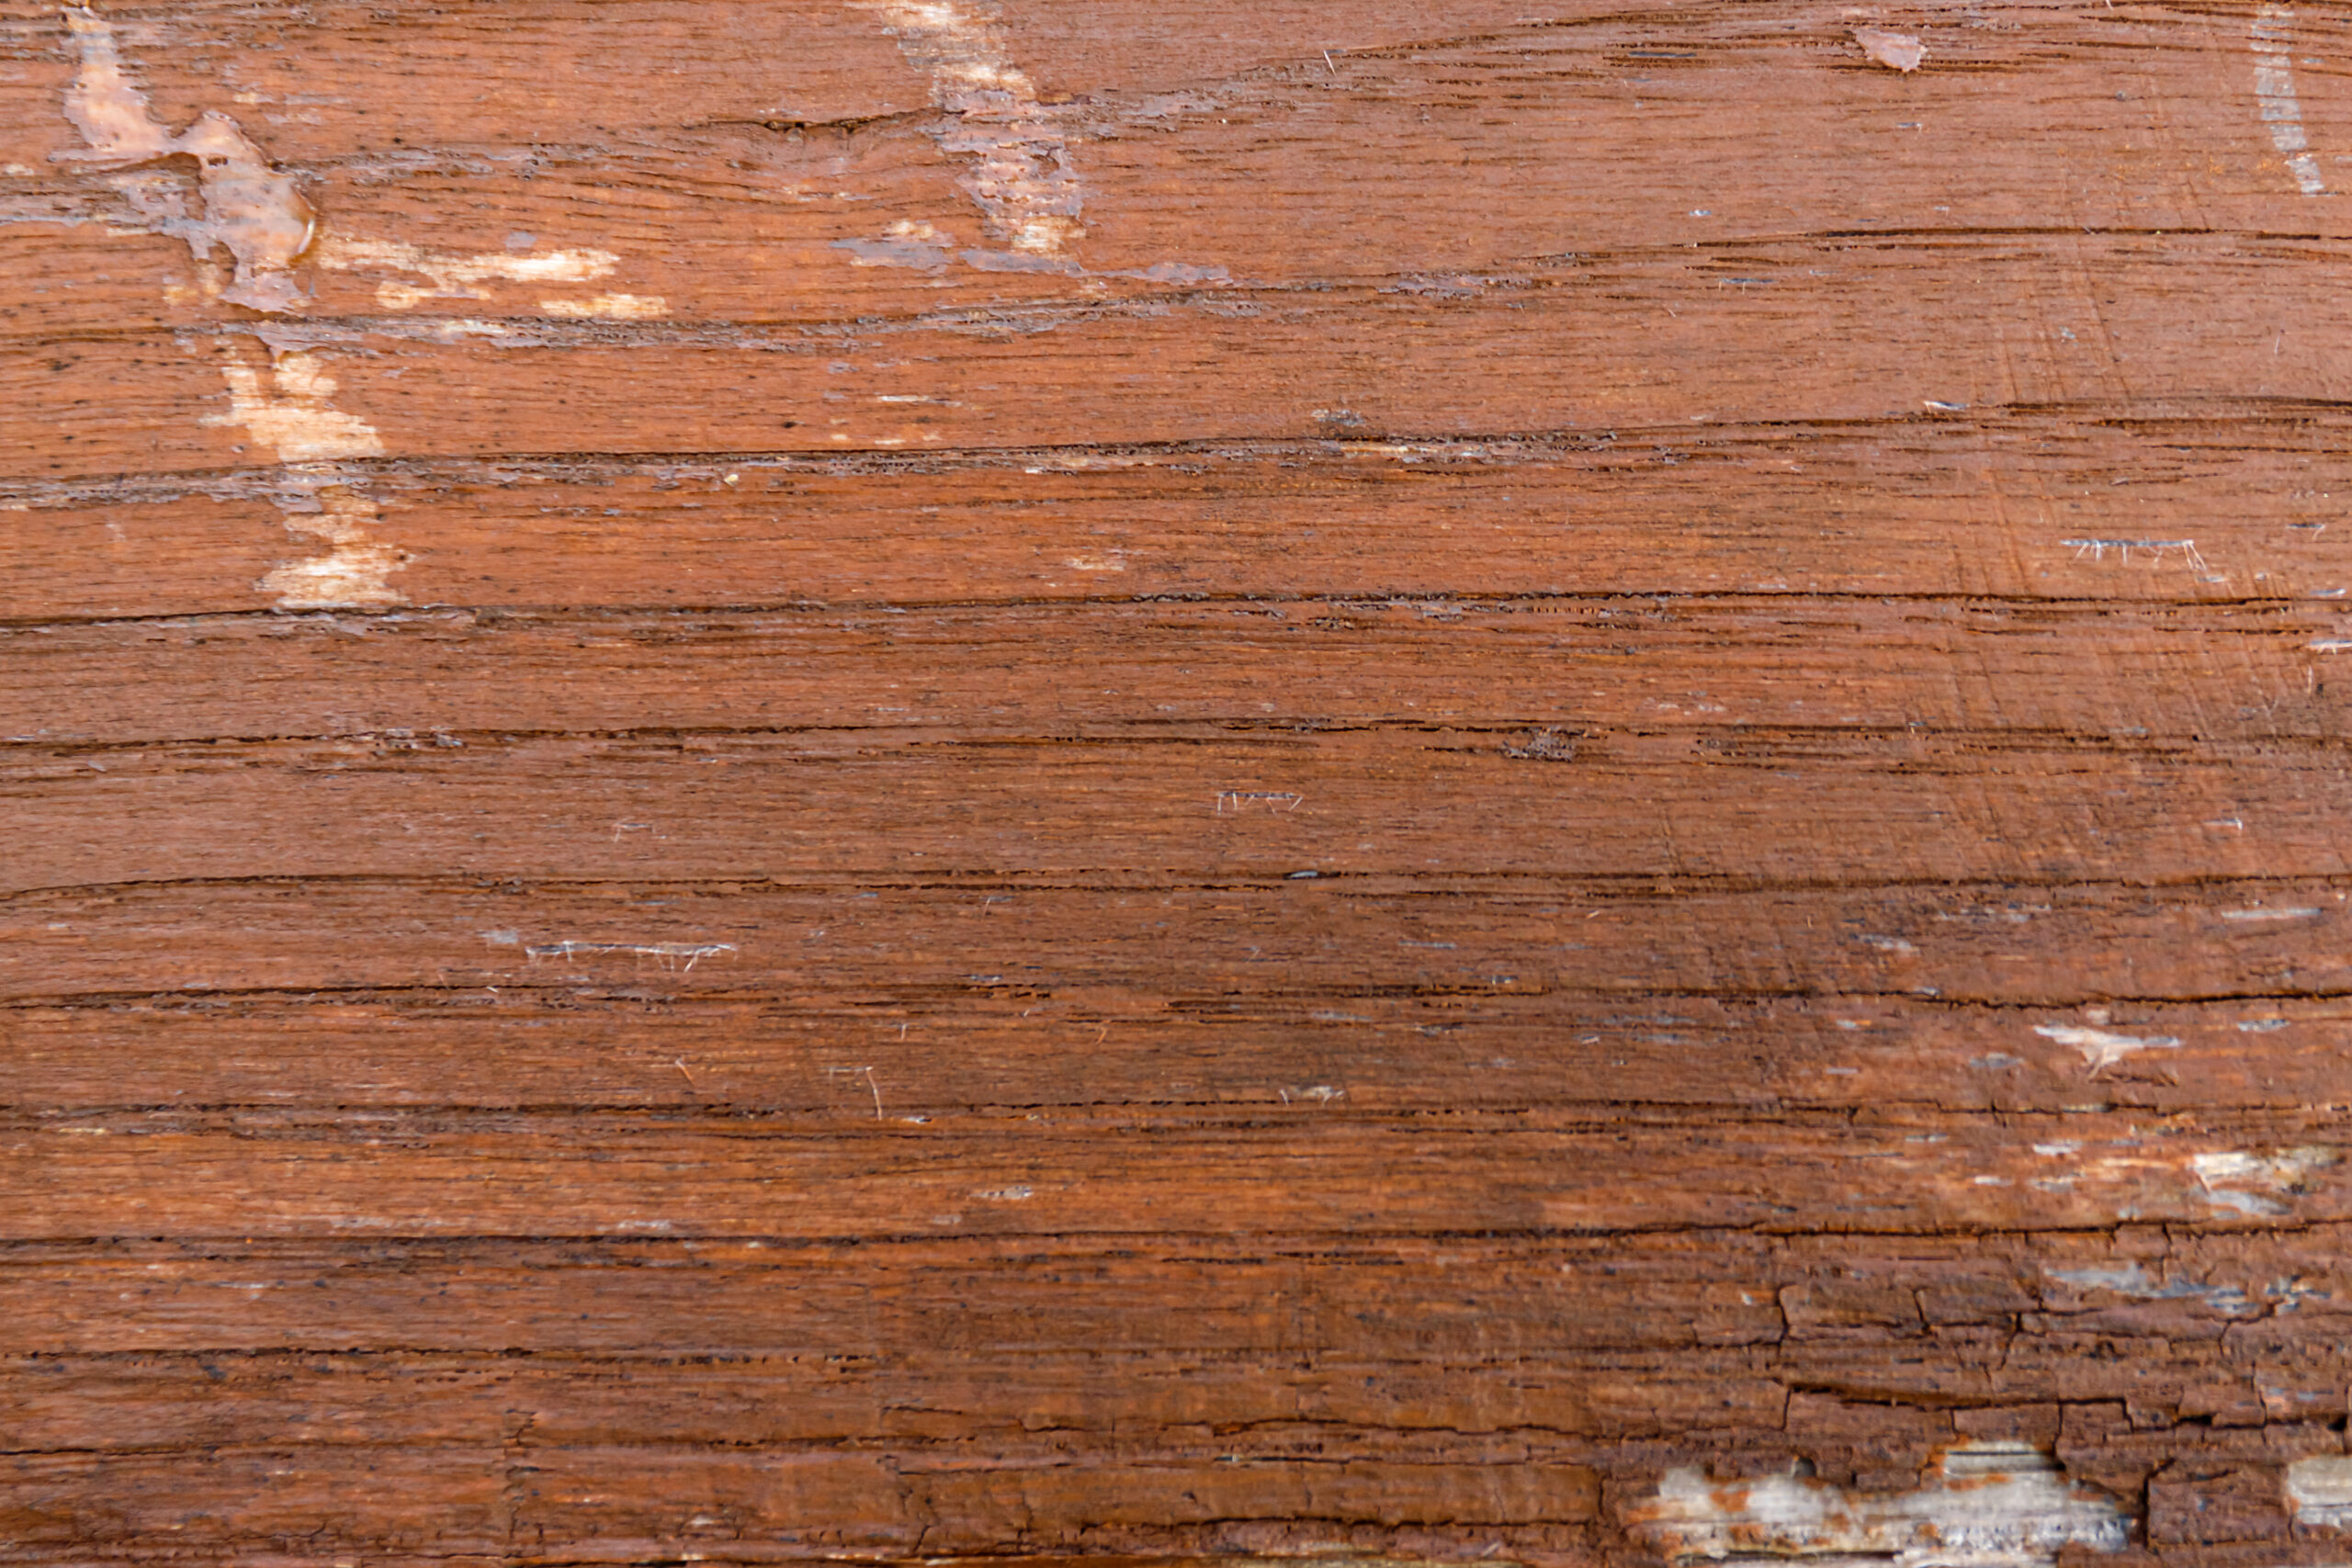 natural oak texture with beautiful wooden grain w 2021 11 03 06 05 18 utc scaled 9 things you didn’t know could be made from wood